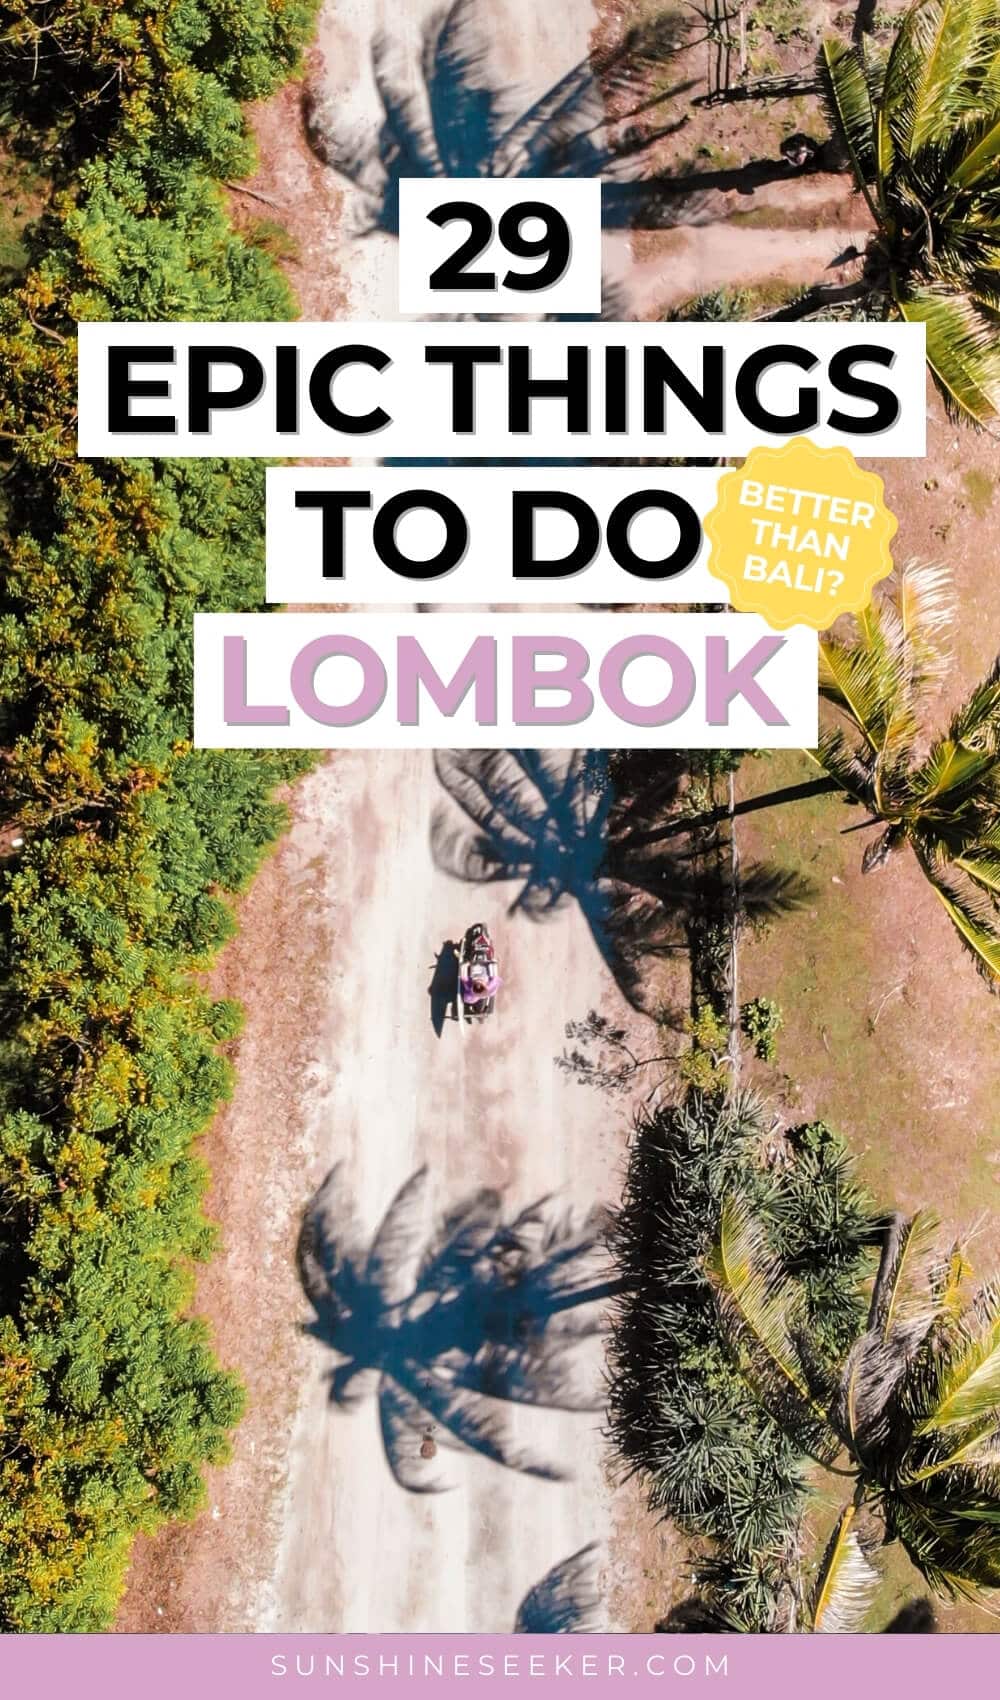 Discover all the best things to do in Lombok. From trekking Mount Rinjani to paradise beaches and waterfalls. This is the ultimate Lombok bucket list.